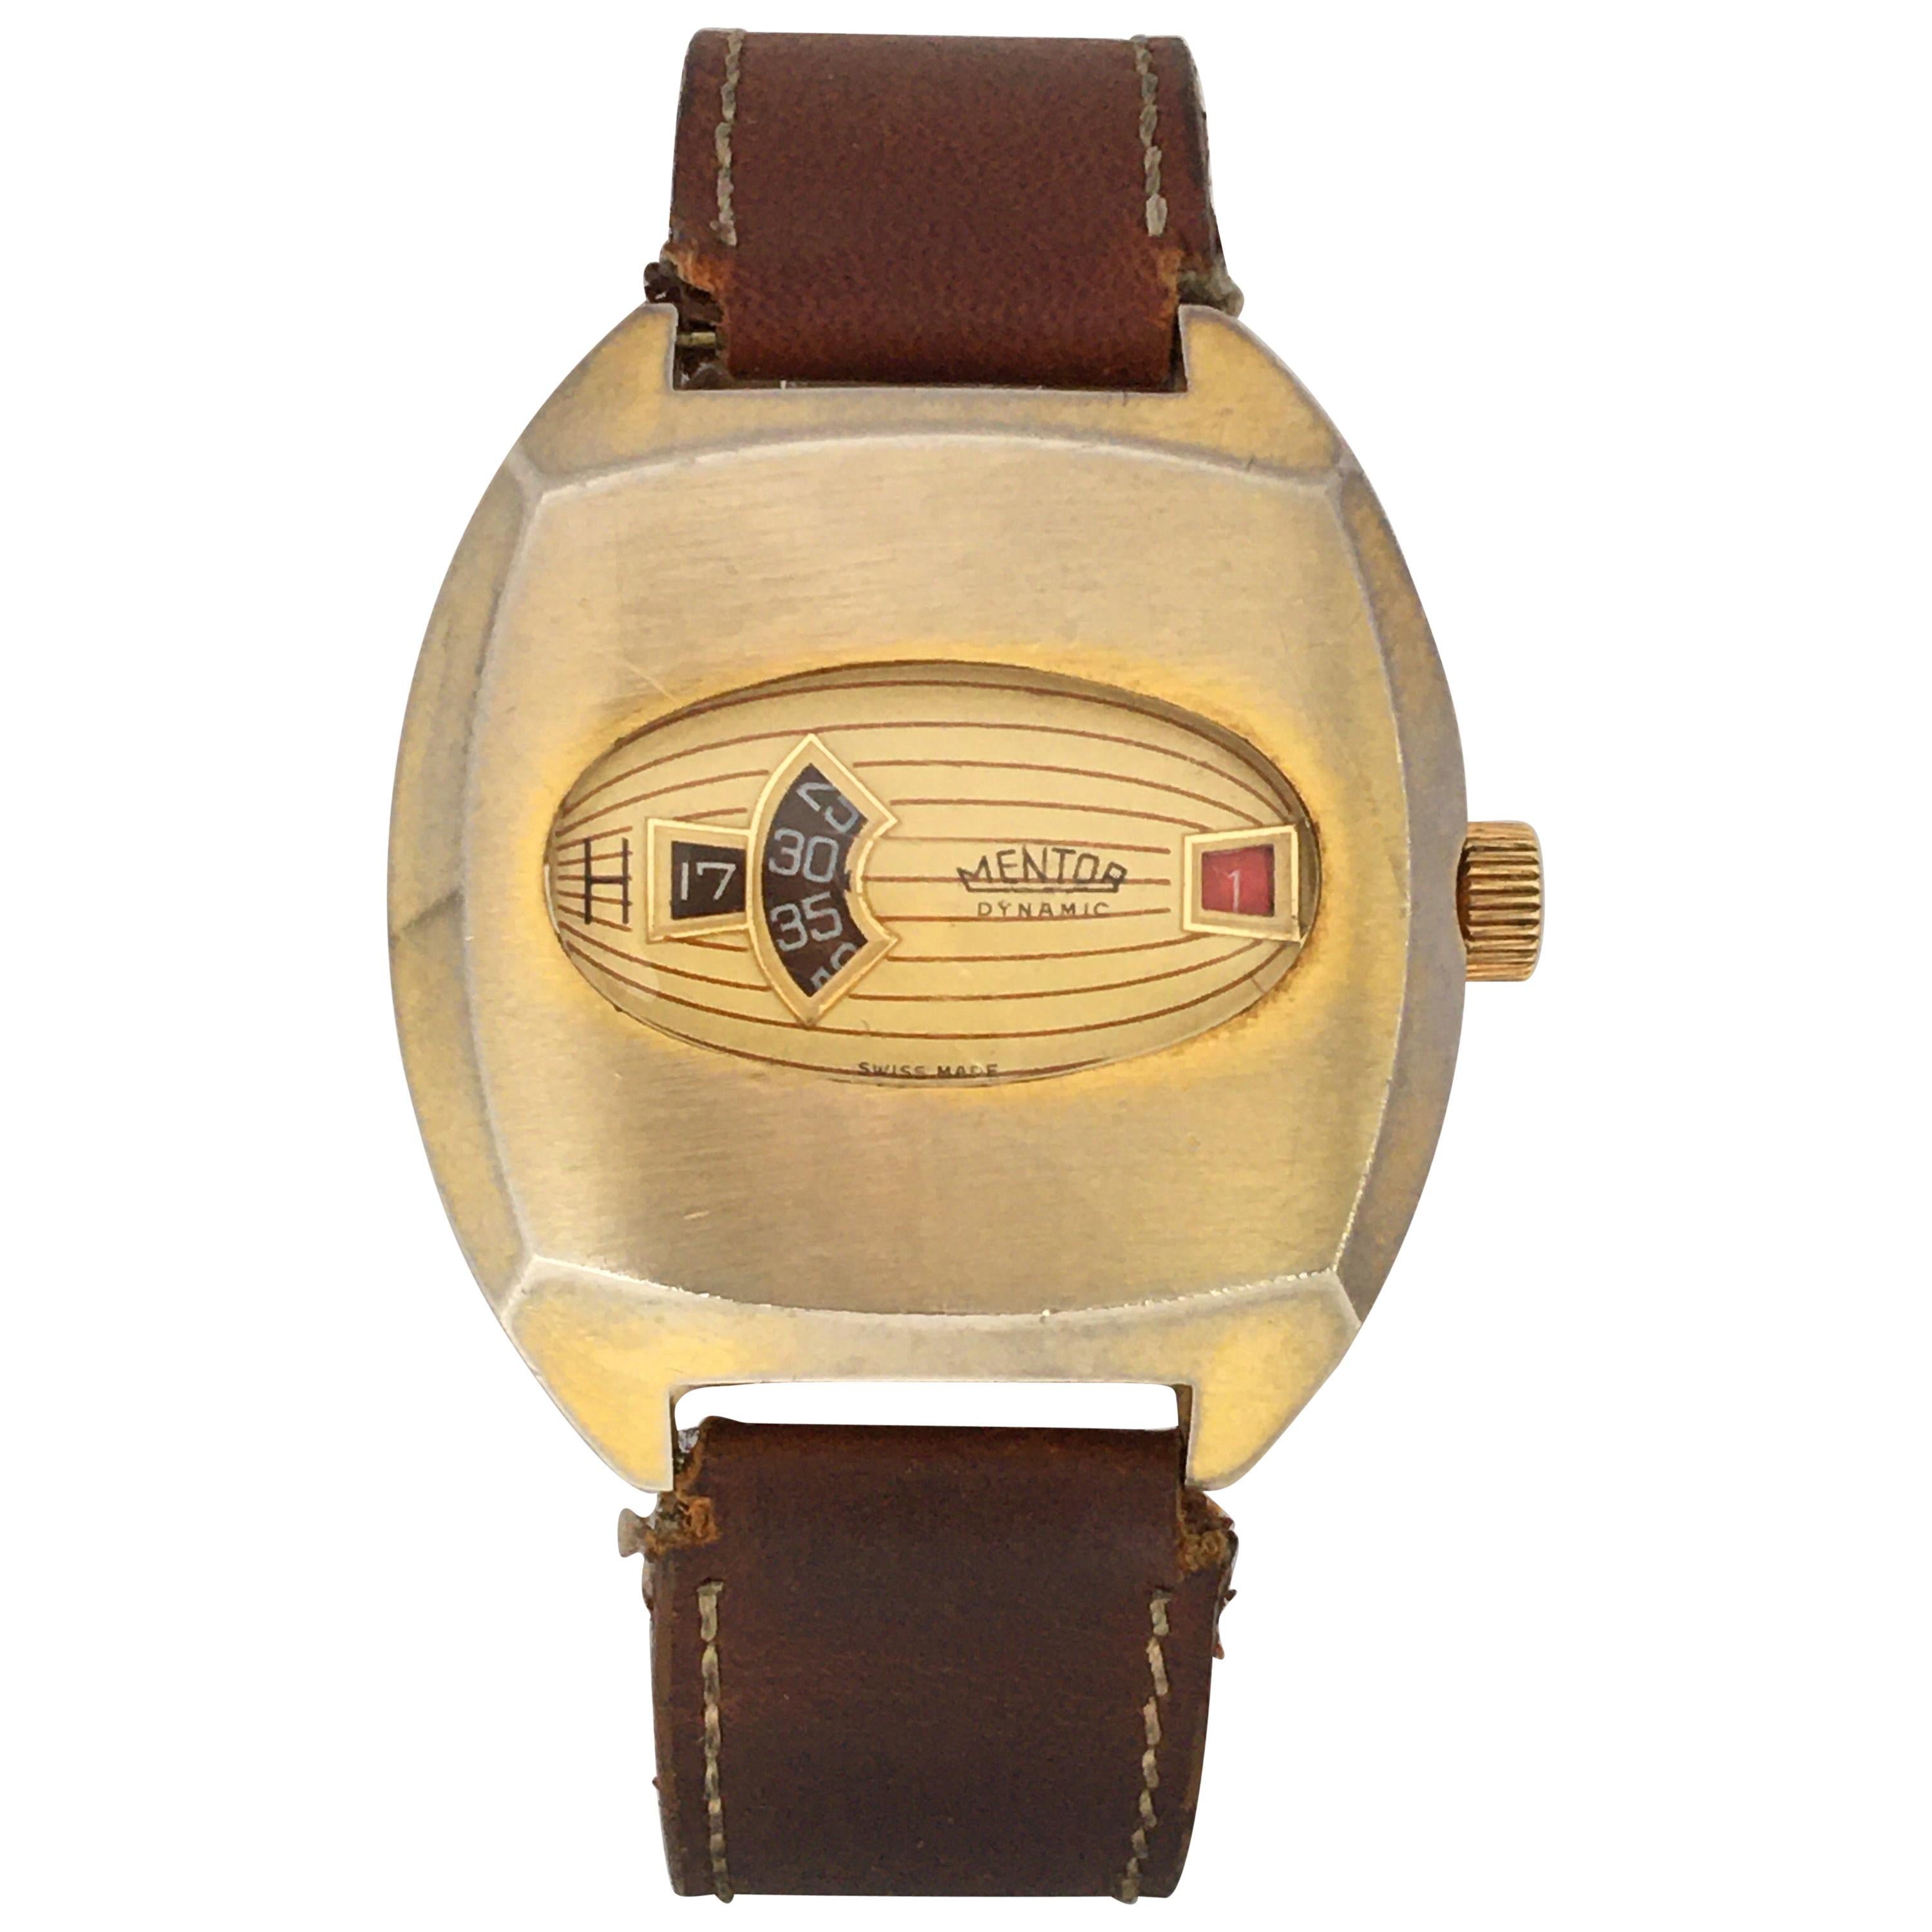 1970s Vintage Jump Hour Digital Mechanical Swiss Watch with Date